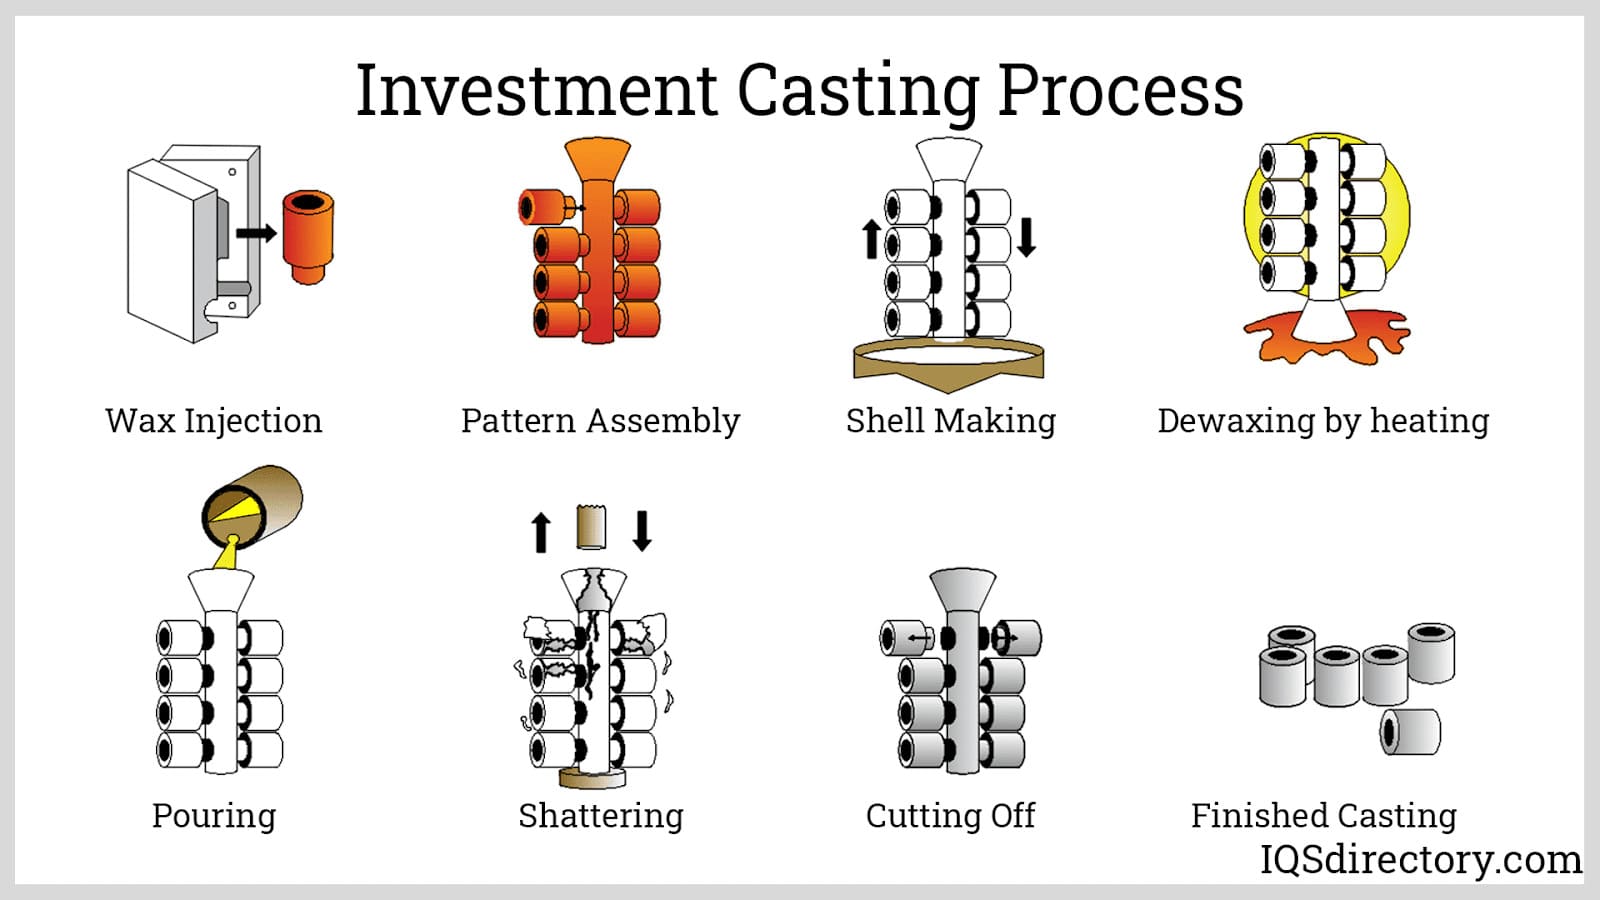 Investment Casting Process